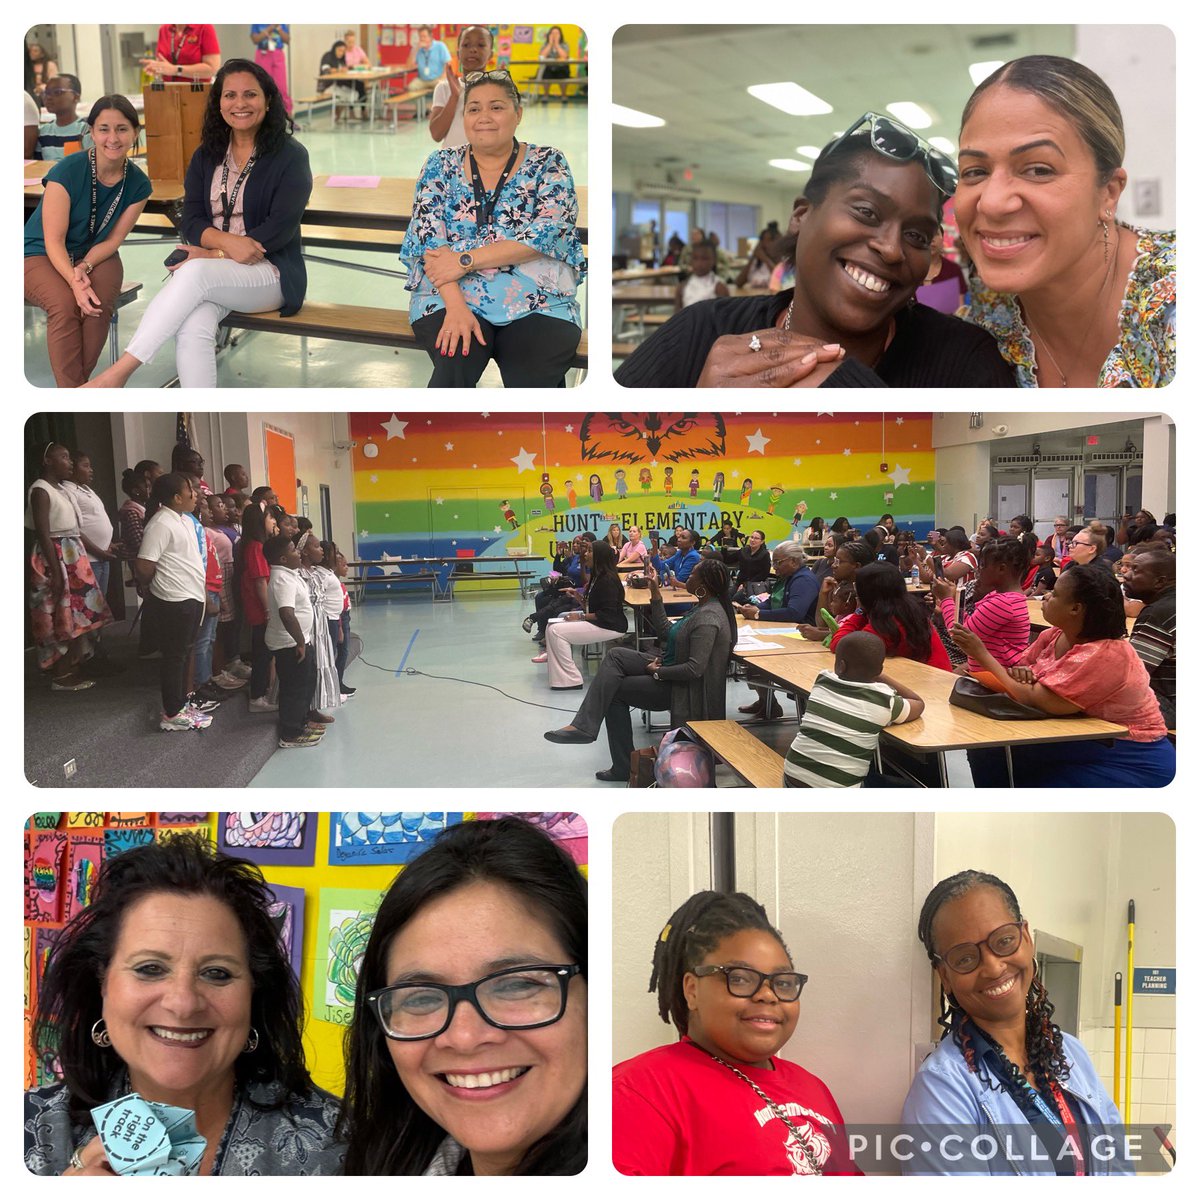 We had an amazing curriculum night. The activities were engaging and fun. Our students and parents were focused. @MPerezDir @PRINCIPALAMAKER @BCPSNorthRegion @lorialhadeff